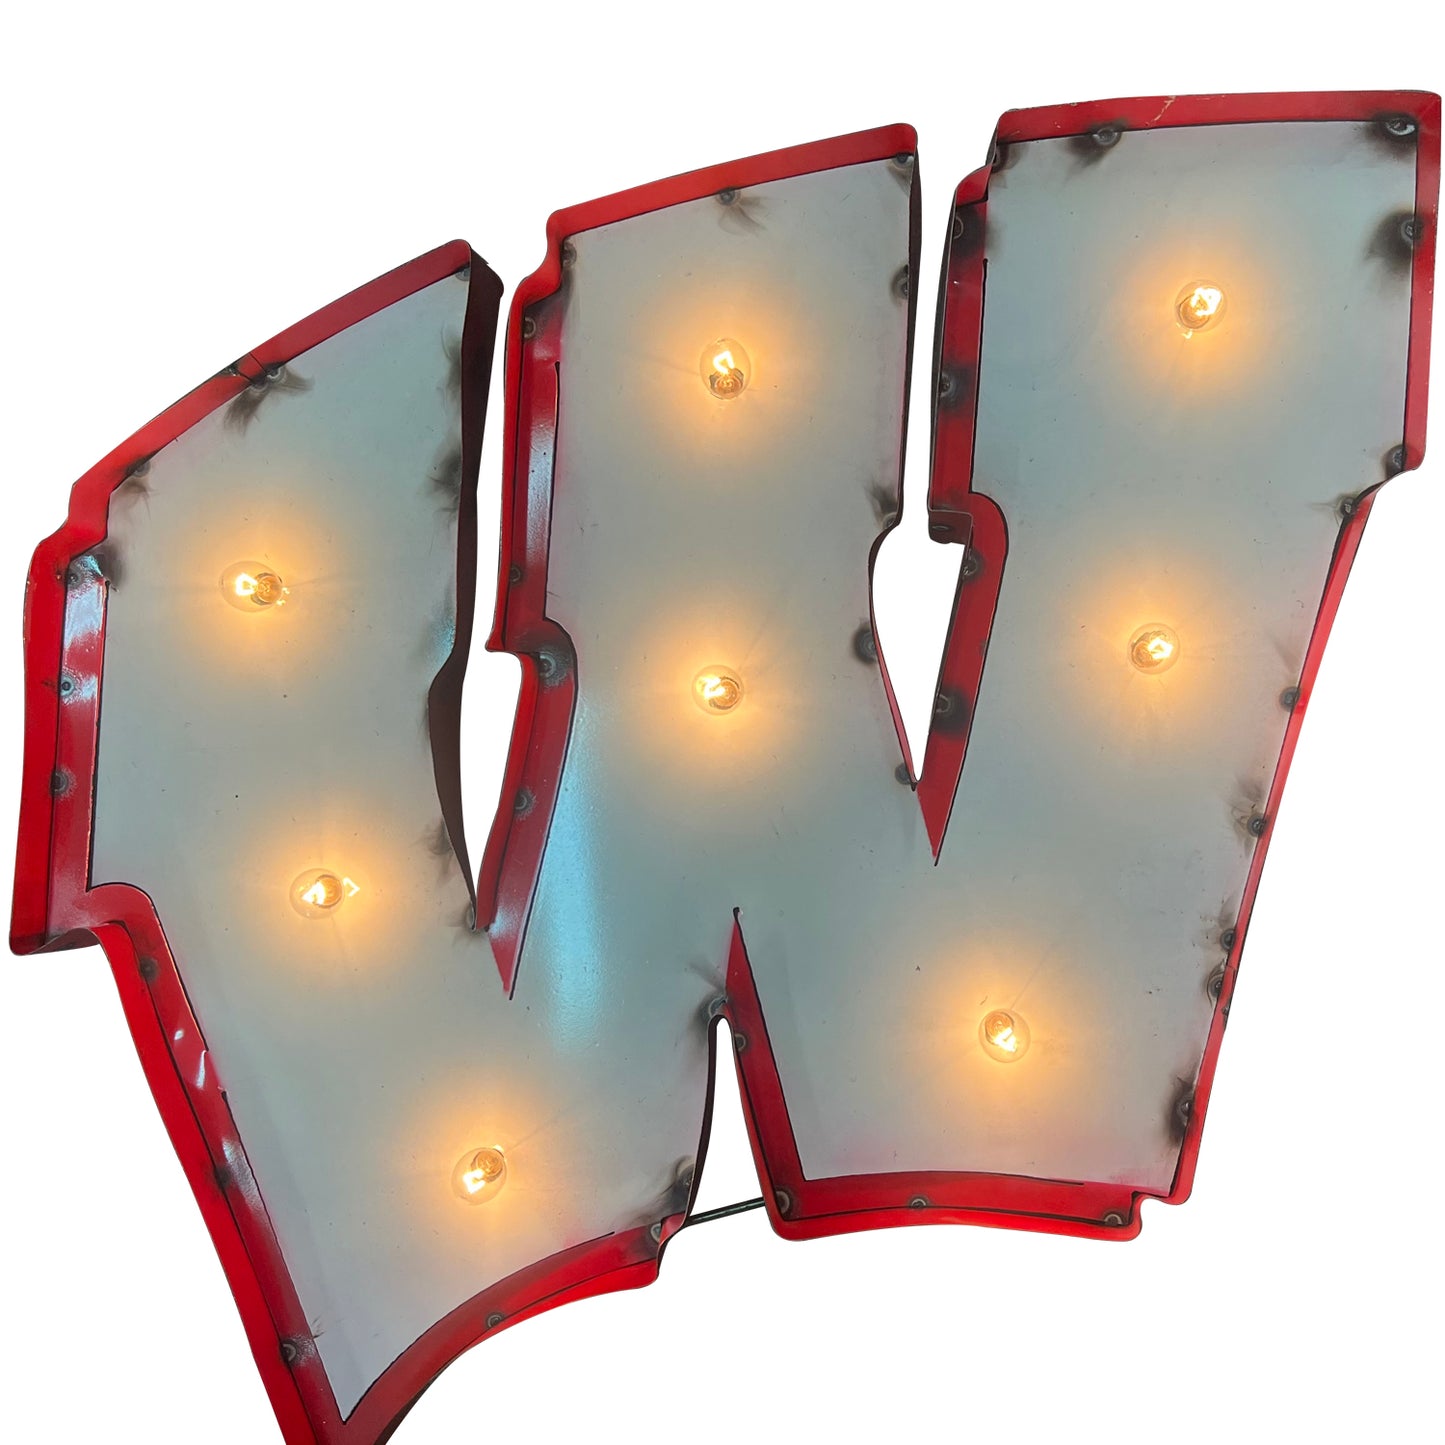 The University of Wisconsin Badgers Illuminated Recycled Metal Wall Decor